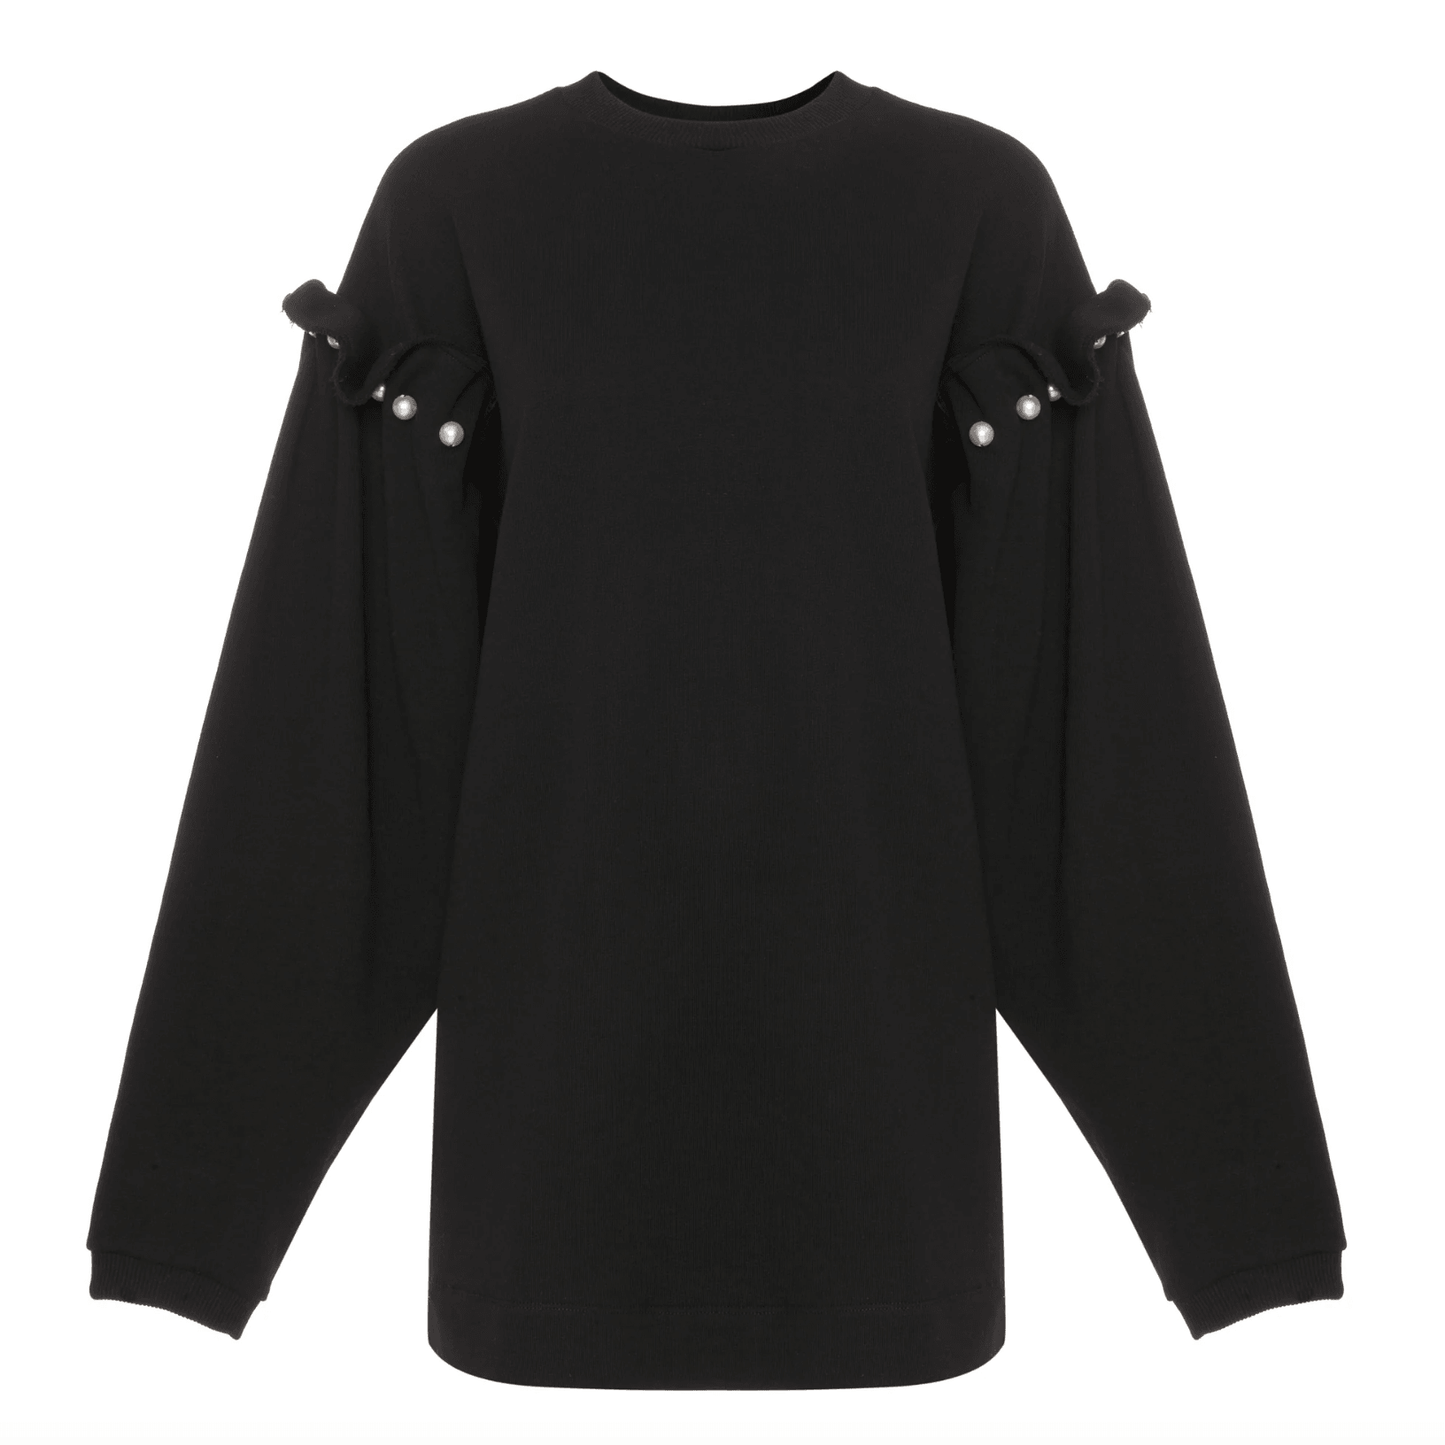 Mother of Pearl - Darby Pearl Oversized Black Sweatshirt - 32 The Guild